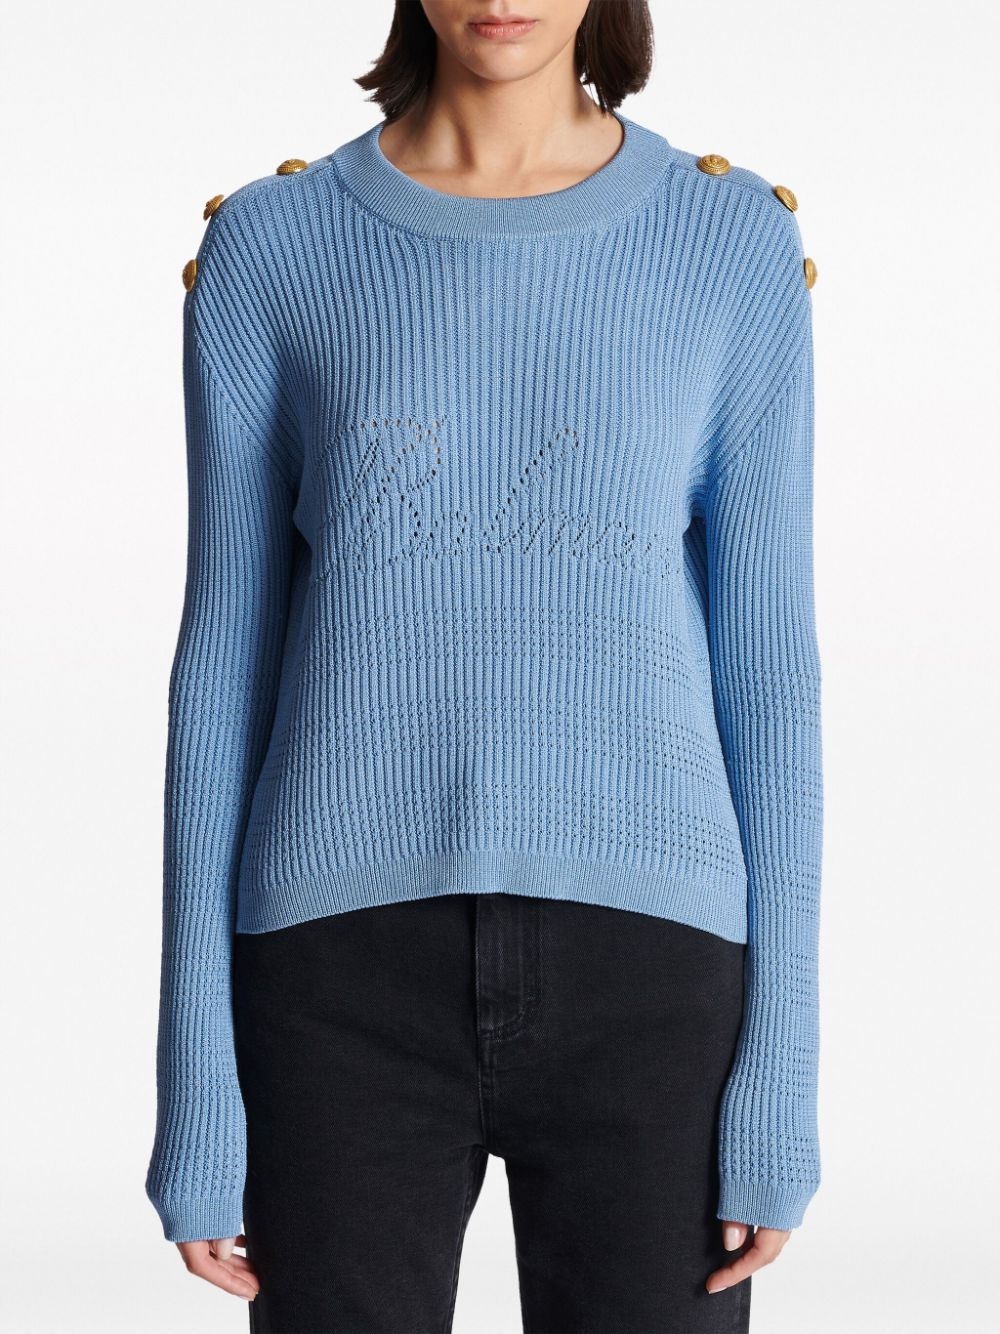 embossed-button ribbed-knit jumper - 5